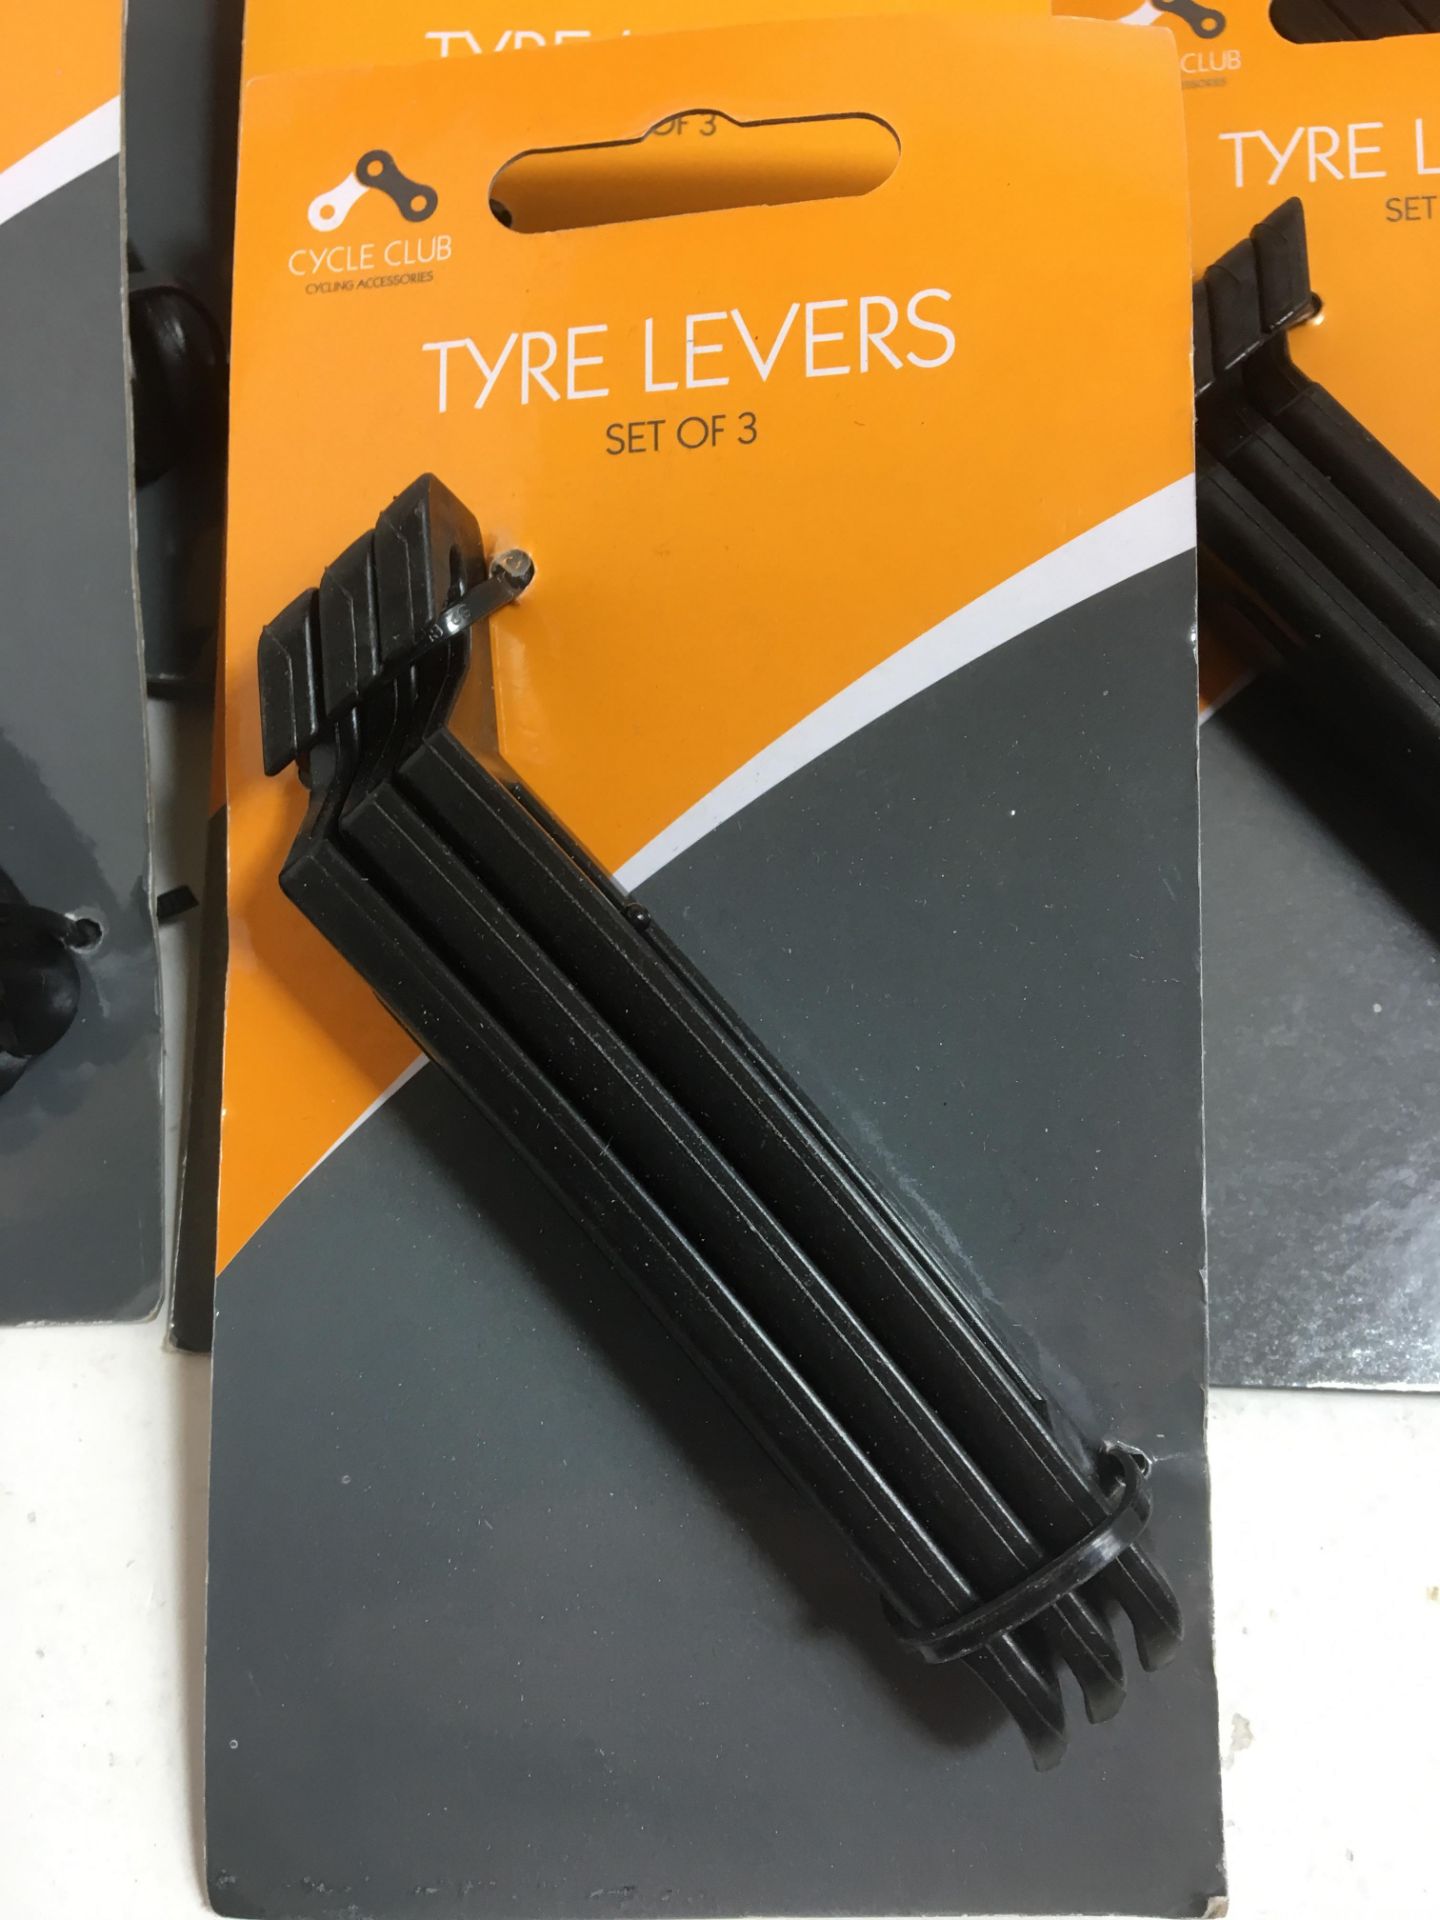 10 x Cycle Club Tyre Levers Set of 3s - Image 2 of 2